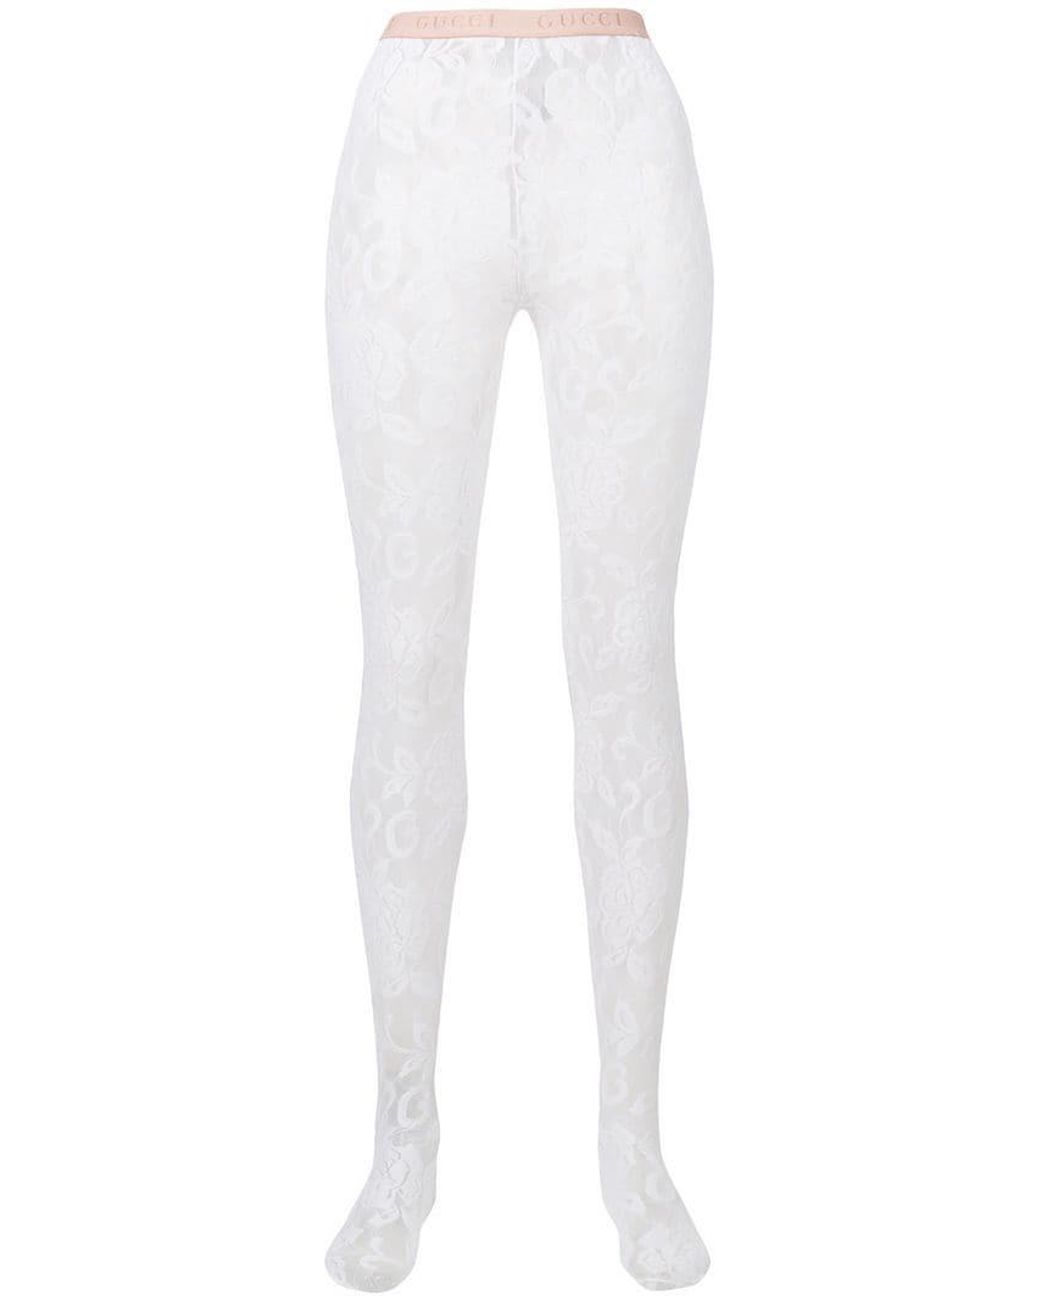 Sheer Floral Lace Tights 20 | Oroblù